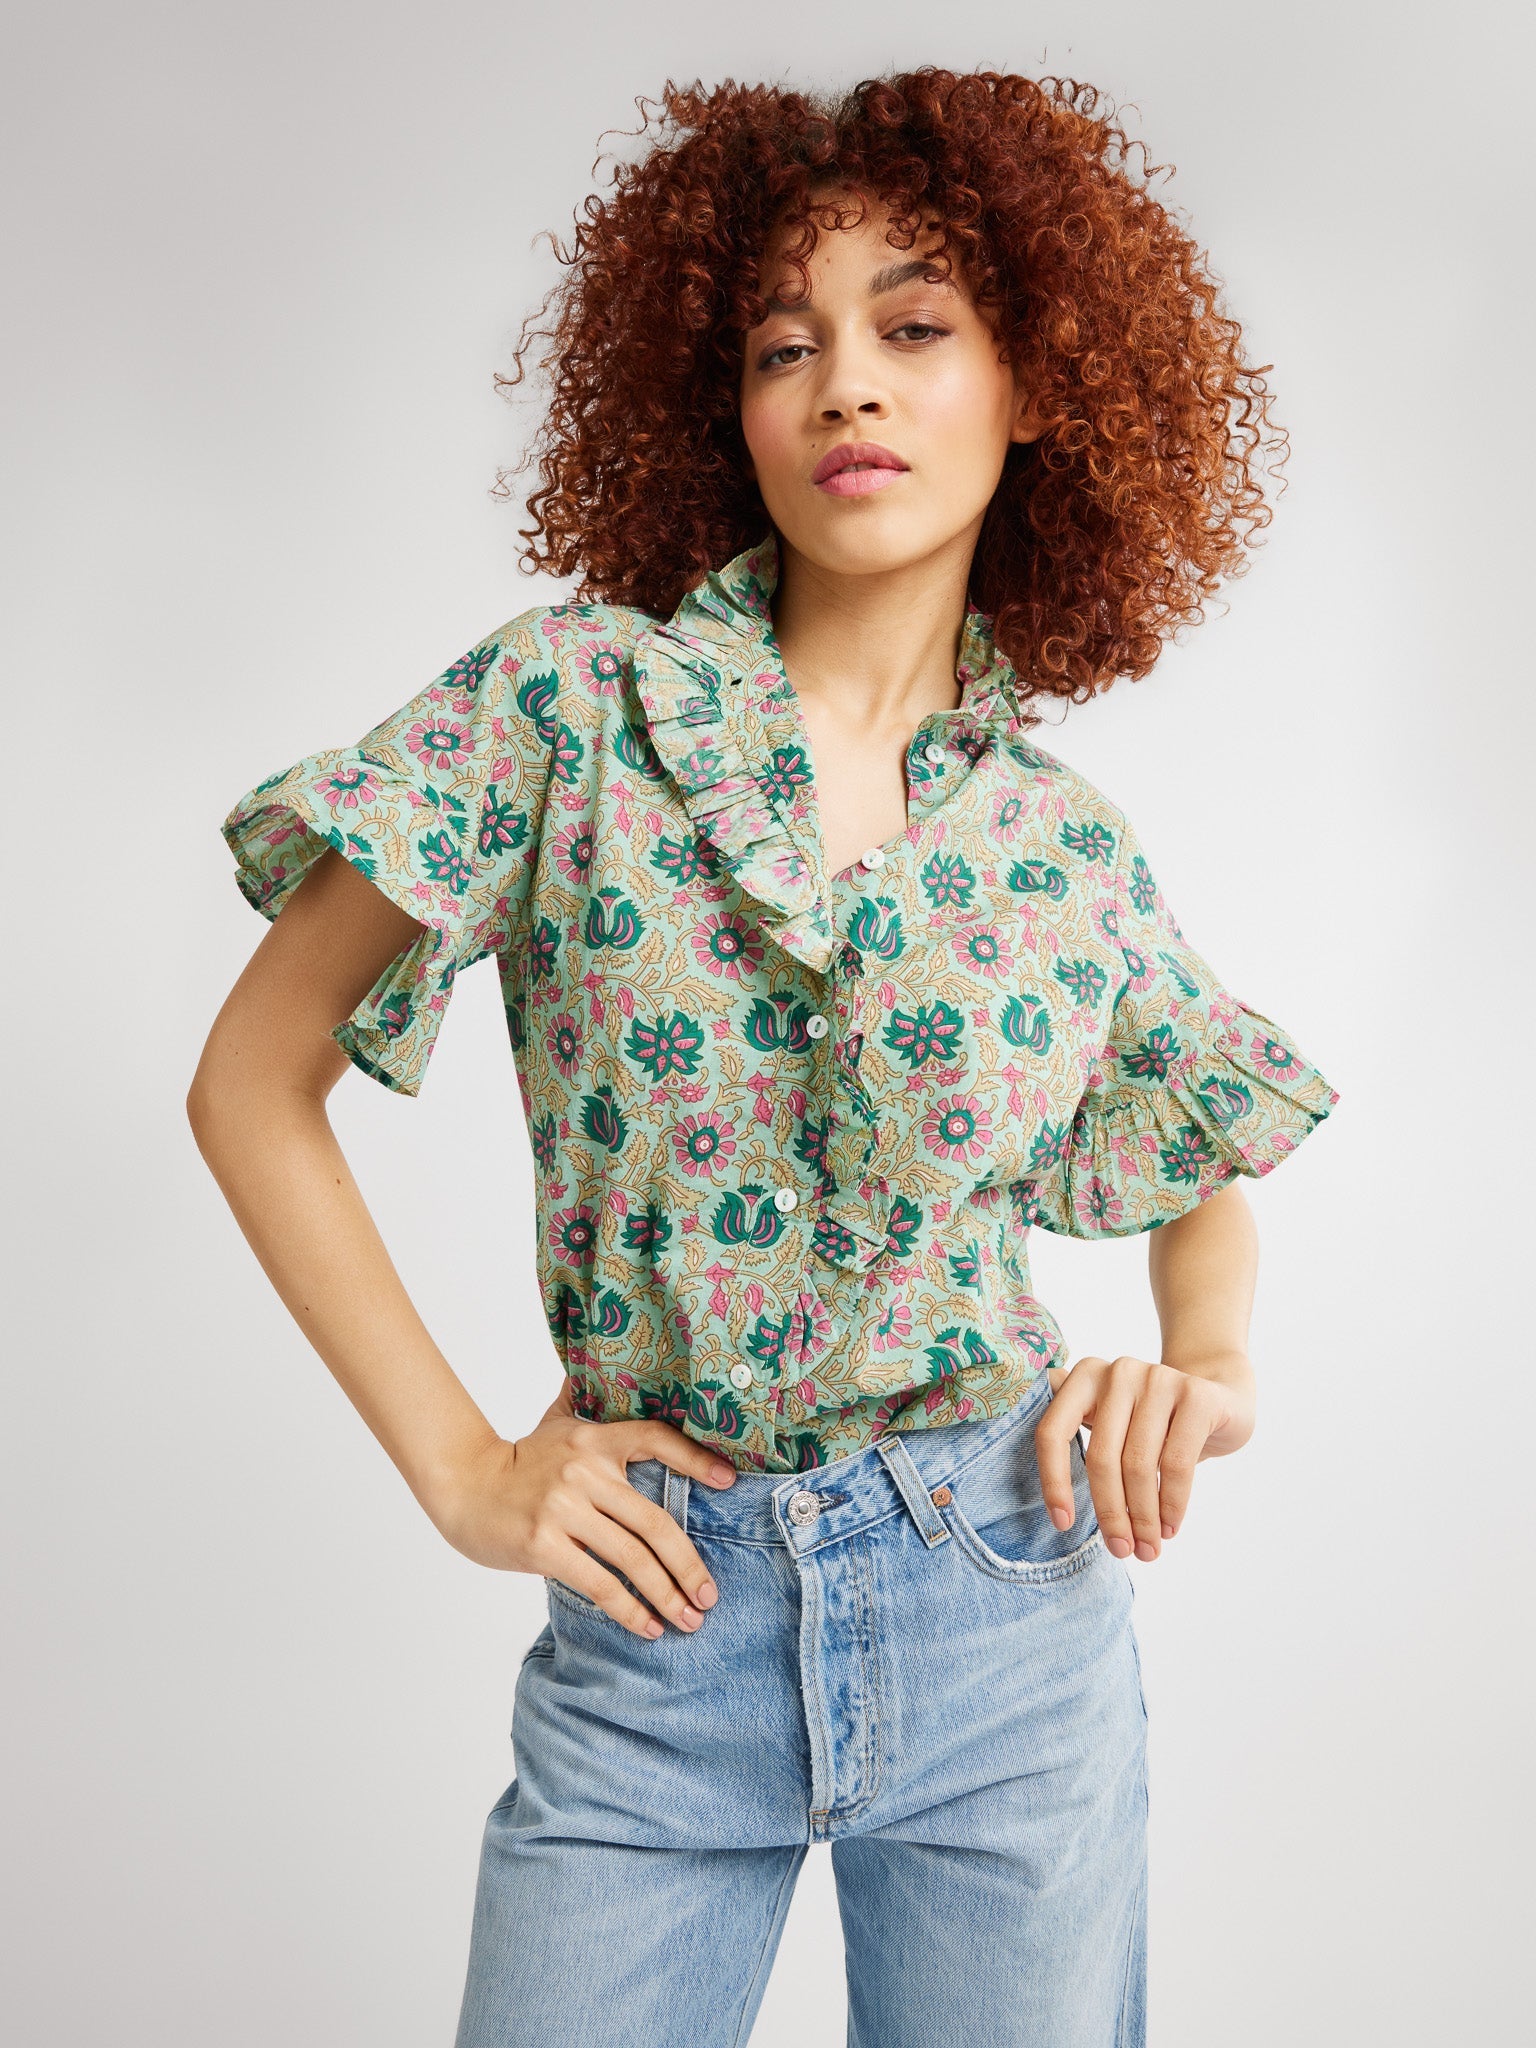 MILLE Clothing Vanessa Top in Caribbean Floral